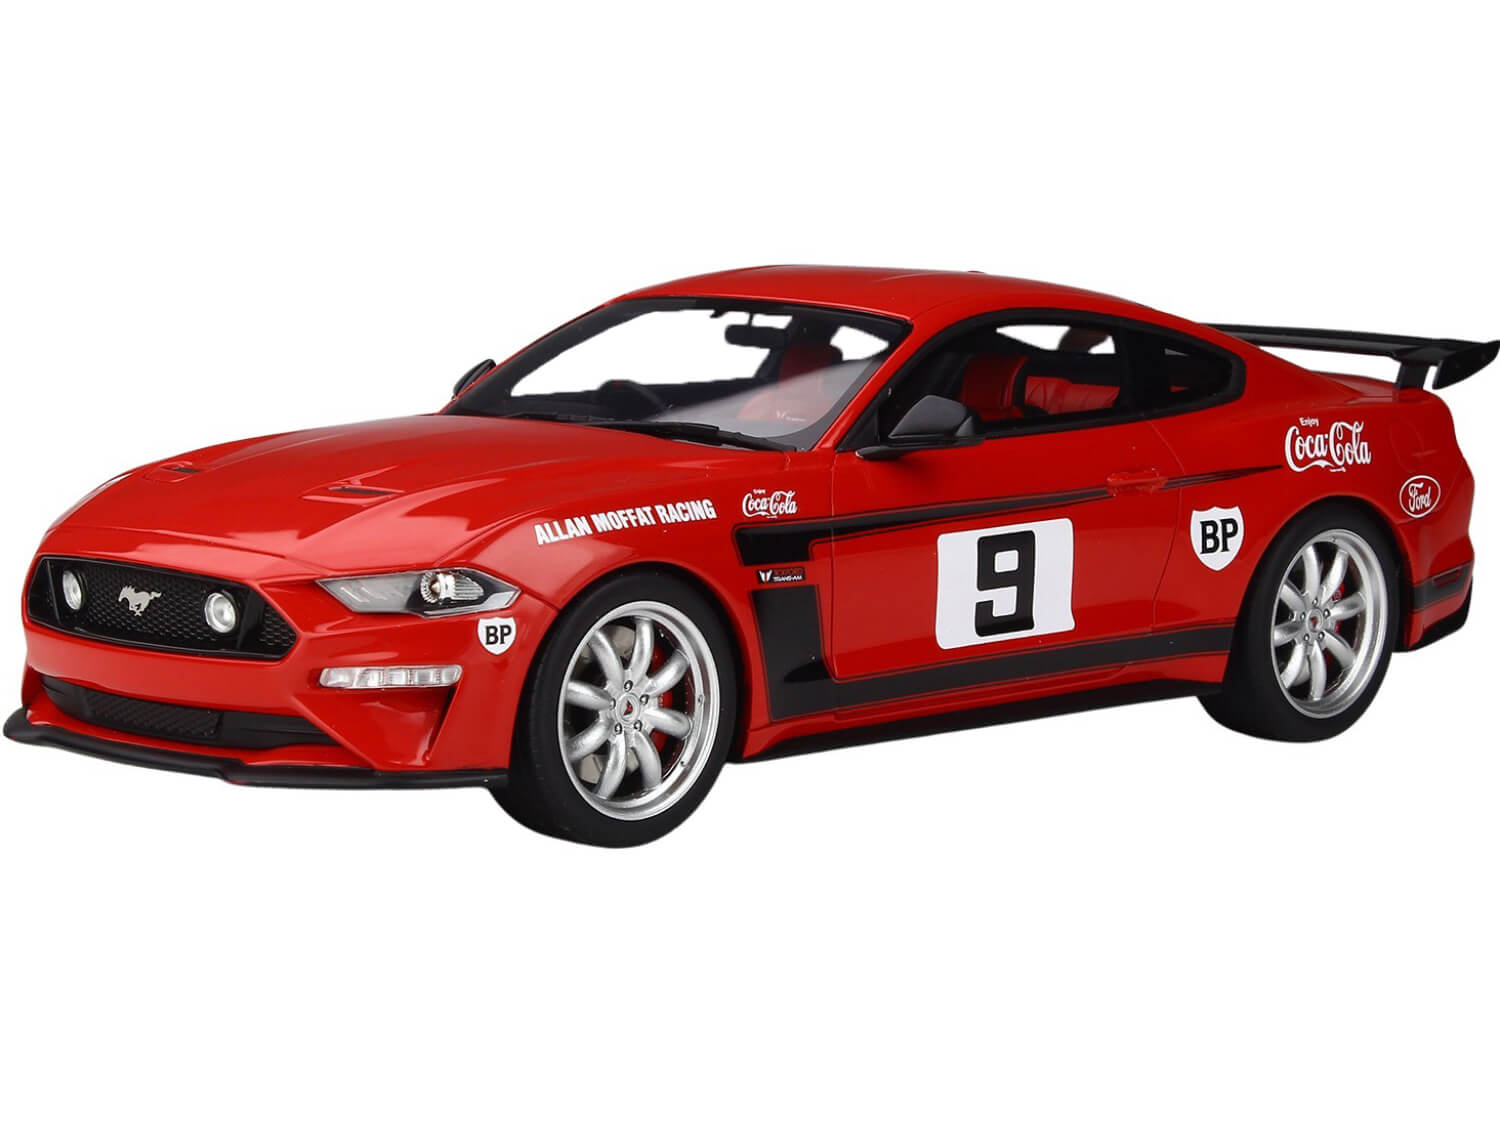 Image of 2019 Ford Mustang RHD (Right Hand Drive) 9 "Coca-Cola" Red with Black Stripes "Allan Moffat Tribute by Tickford" 1/18 Model Car by GT Spirit for ACME